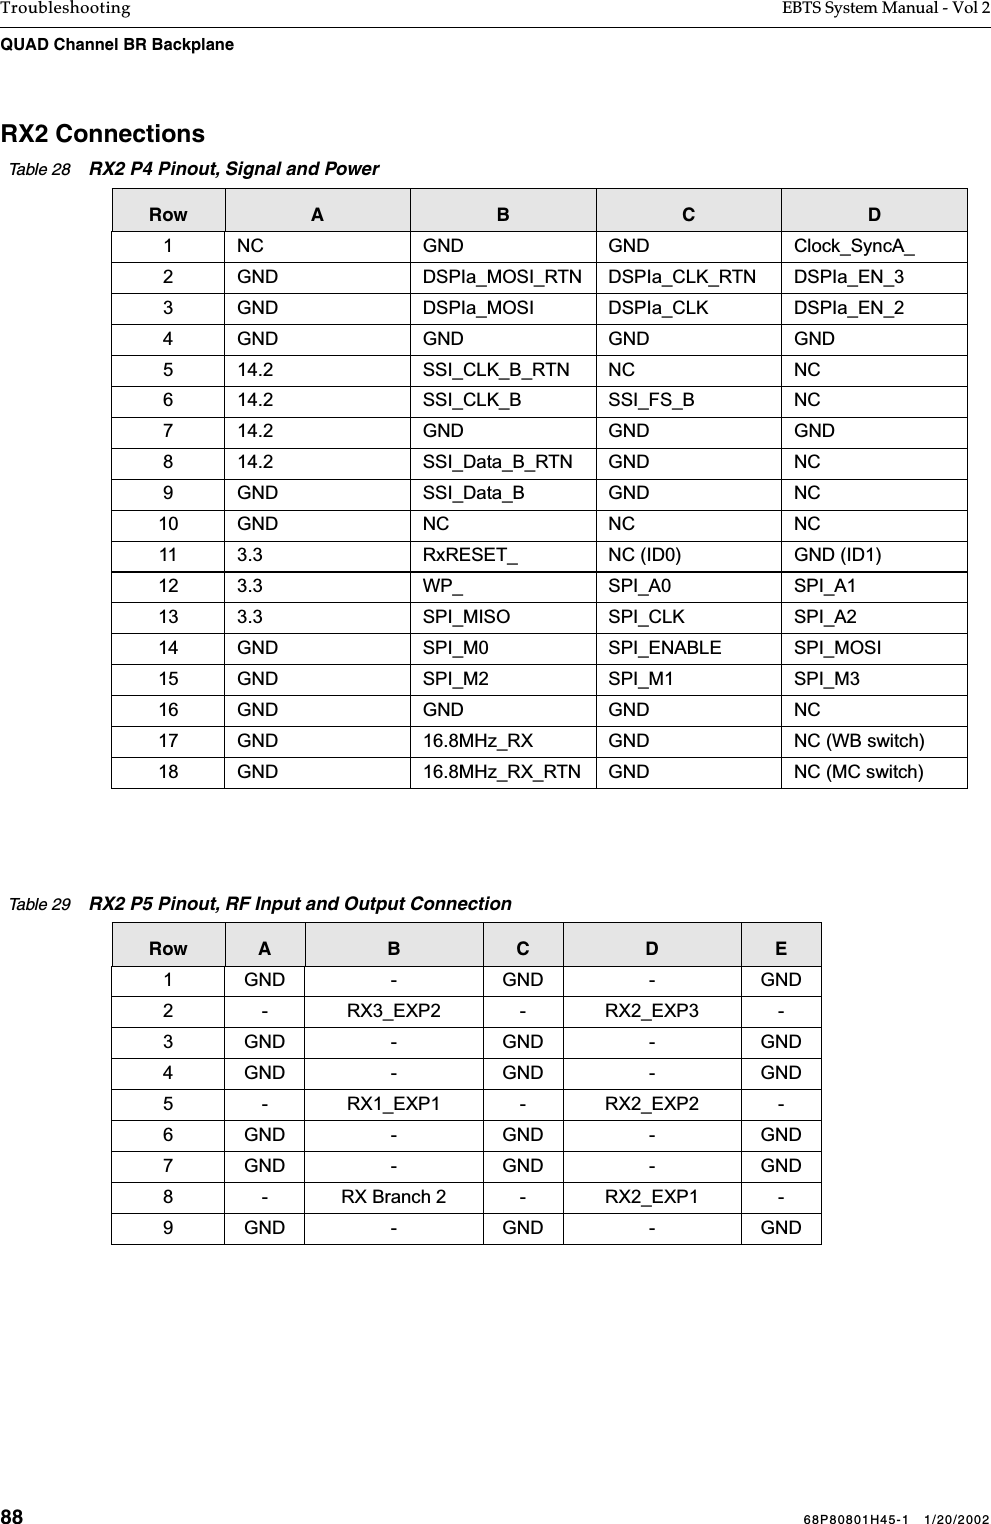 88 68P80801H45-1   1/20/2002Troubleshooting EBTS System Manual - Vol 2QUAD Channel BR Backplane RX2 ConnectionsTable 28    RX2 P4 Pinout, Signal and PowerRow A B C D1 NC GND GND Clock_SyncA_2 GND DSPIa_MOSI_RTN DSPIa_CLK_RTN DSPIa_EN_33 GND DSPIa_MOSI DSPIa_CLK DSPIa_EN_24 GND GND GND GND5 14.2 SSI_CLK_B_RTN NC NC6 14.2 SSI_CLK_B SSI_FS_B NC7 14.2 GND GND GND8 14.2 SSI_Data_B_RTN GND NC9 GND SSI_Data_B GND NC10 GND NC NC NC11 3.3 RxRESET_ NC (ID0) GND (ID1)12 3.3 WP_ SPI_A0 SPI_A113 3.3 SPI_MISO SPI_CLK SPI_A214 GND SPI_M0 SPI_ENABLE SPI_MOSI15 GND SPI_M2 SPI_M1 SPI_M316 GND GND GND NC17 GND 16.8MHz_RX GND NC (WB switch)18 GND 16.8MHz_RX_RTN GND NC (MC switch)Table 29    RX2 P5 Pinout, RF Input and Output ConnectionRow A B C D E1 GND - GND - GND2 - RX3_EXP2 - RX2_EXP3 -3 GND - GND - GND4 GND - GND - GND5 - RX1_EXP1 - RX2_EXP2 -6 GND - GND - GND7 GND - GND - GND8 - RX Branch 2 - RX2_EXP1 -9 GND - GND - GND